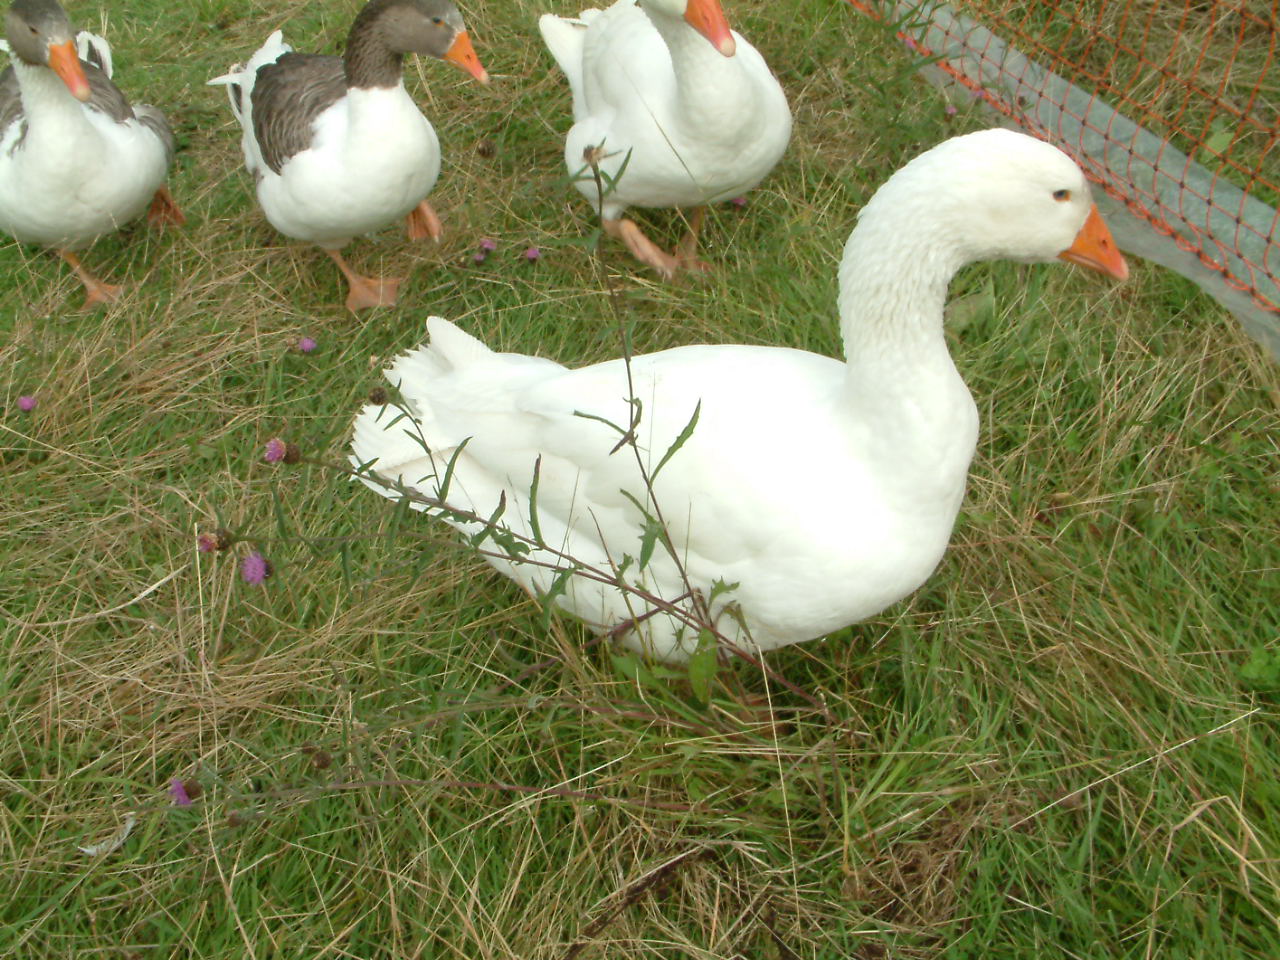 several geese are walking along in the grass